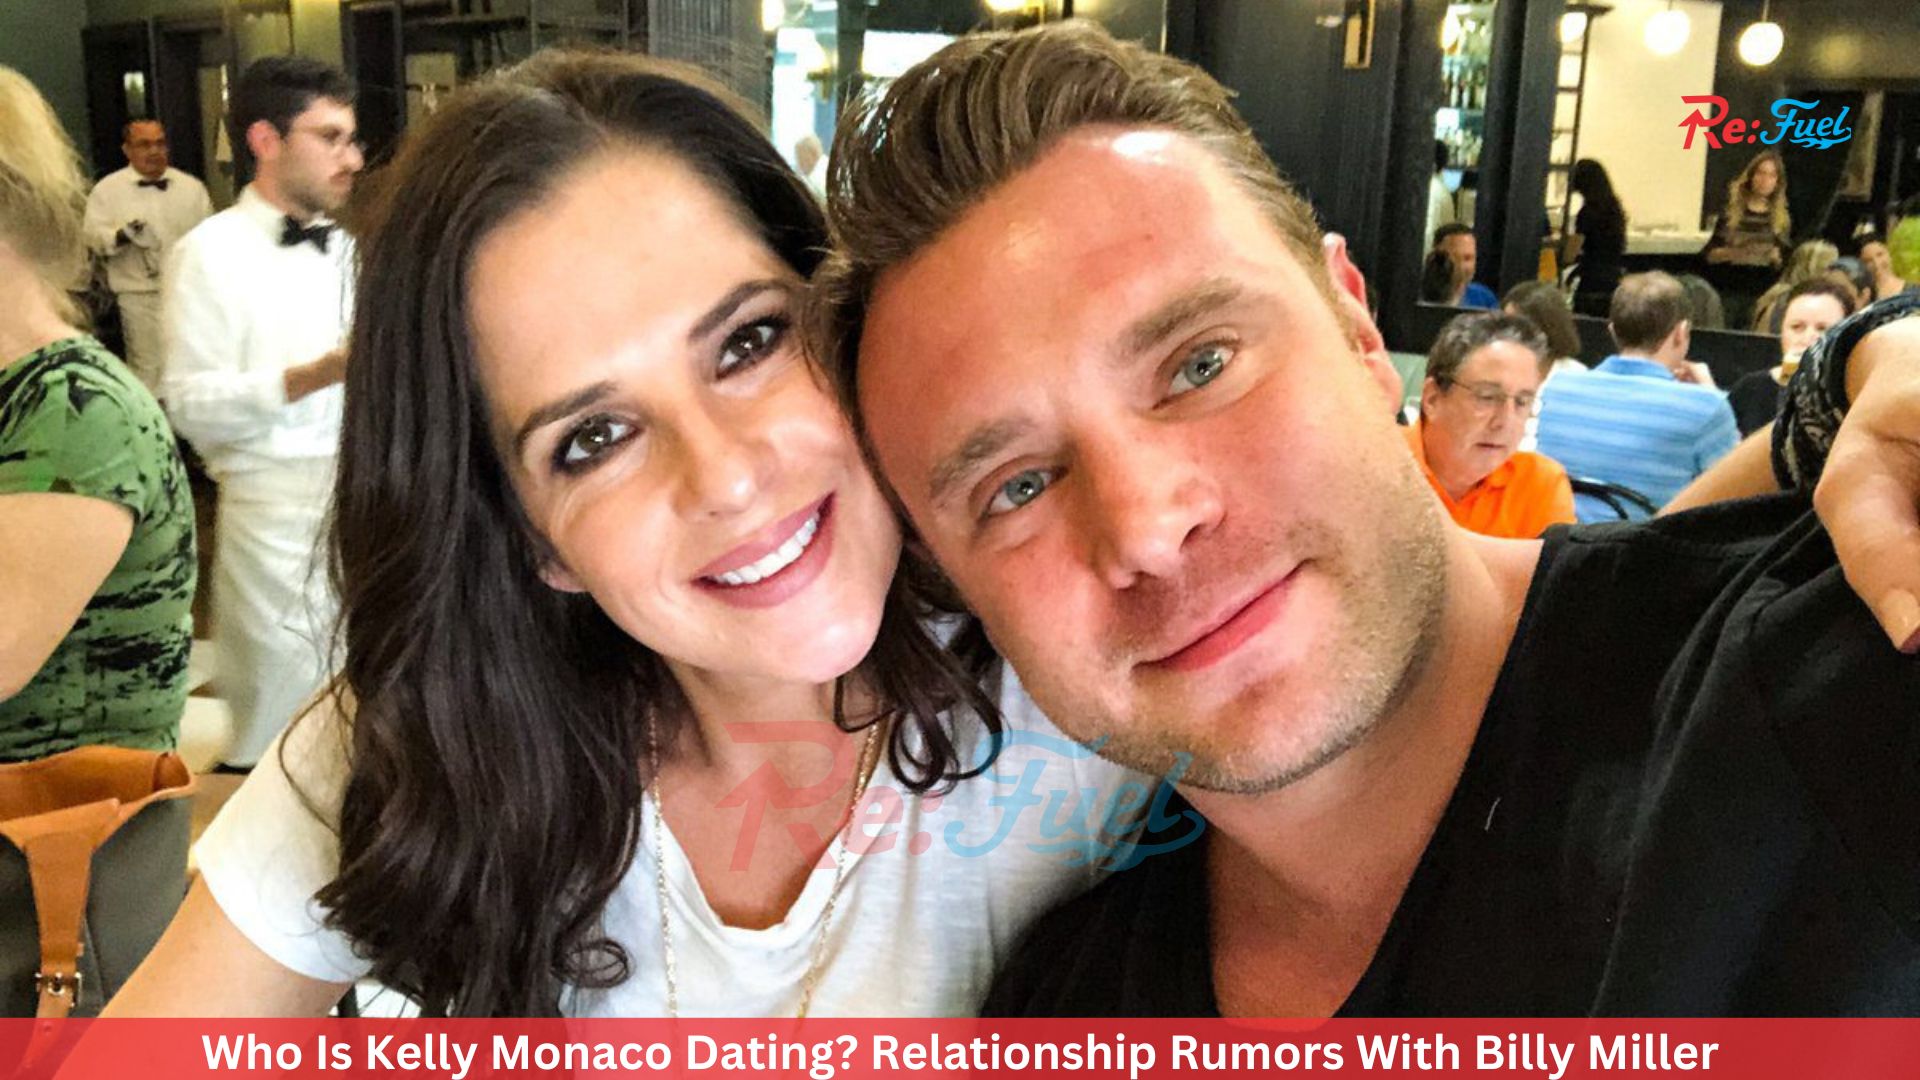 Who Is Kelly Monaco Dating? Relationship Rumors With Billy Miller